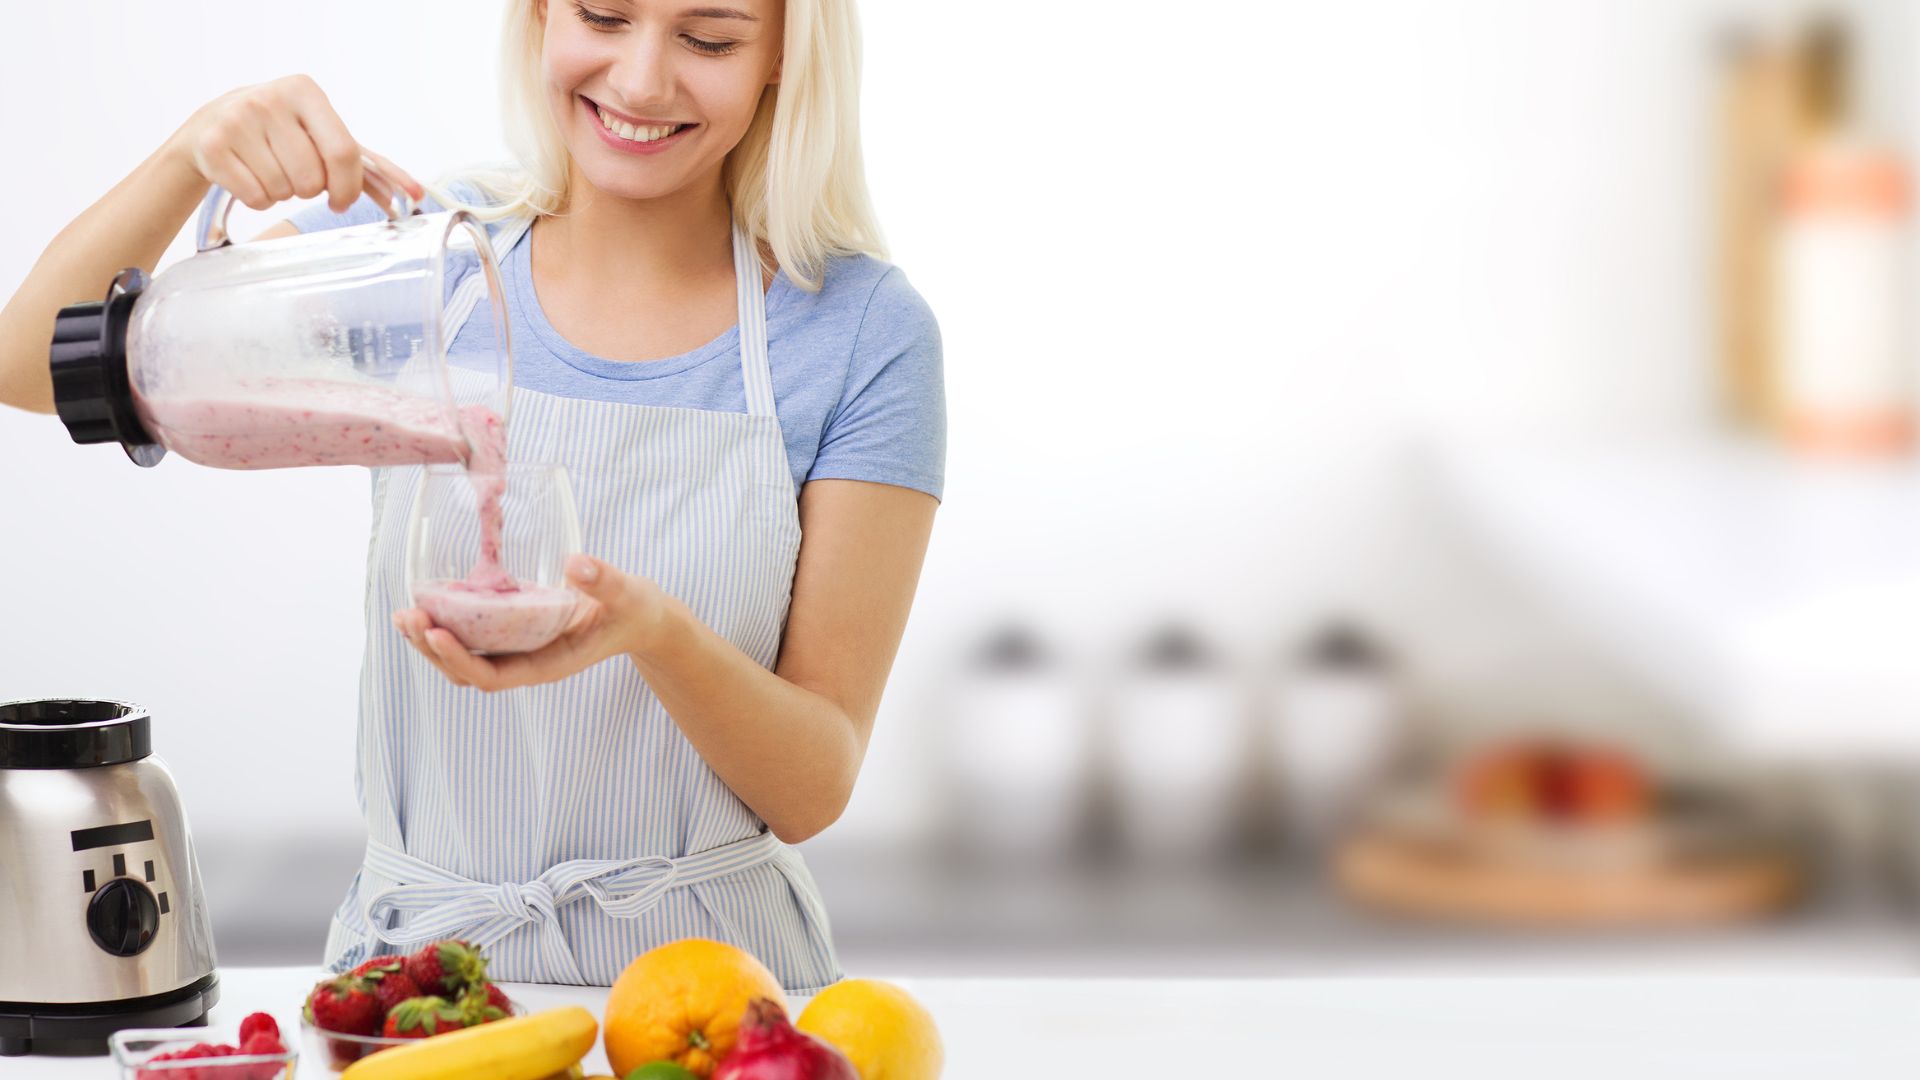 Smiling-Woman-with-Blender-and-Fruit-Milk-Shake